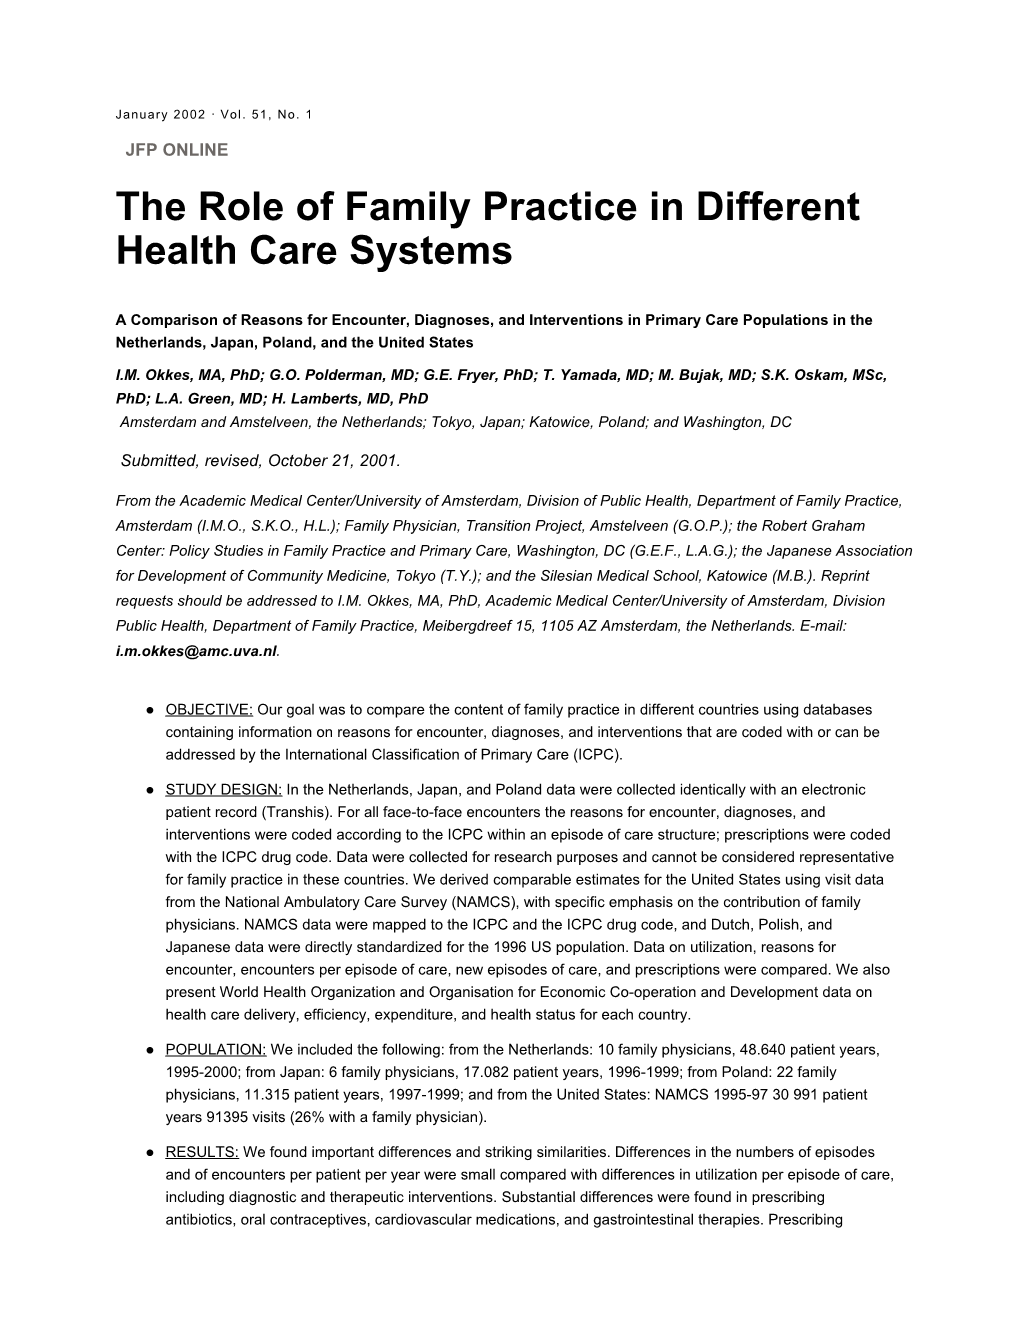 The Role of Family Practice in Different Health Care Systems